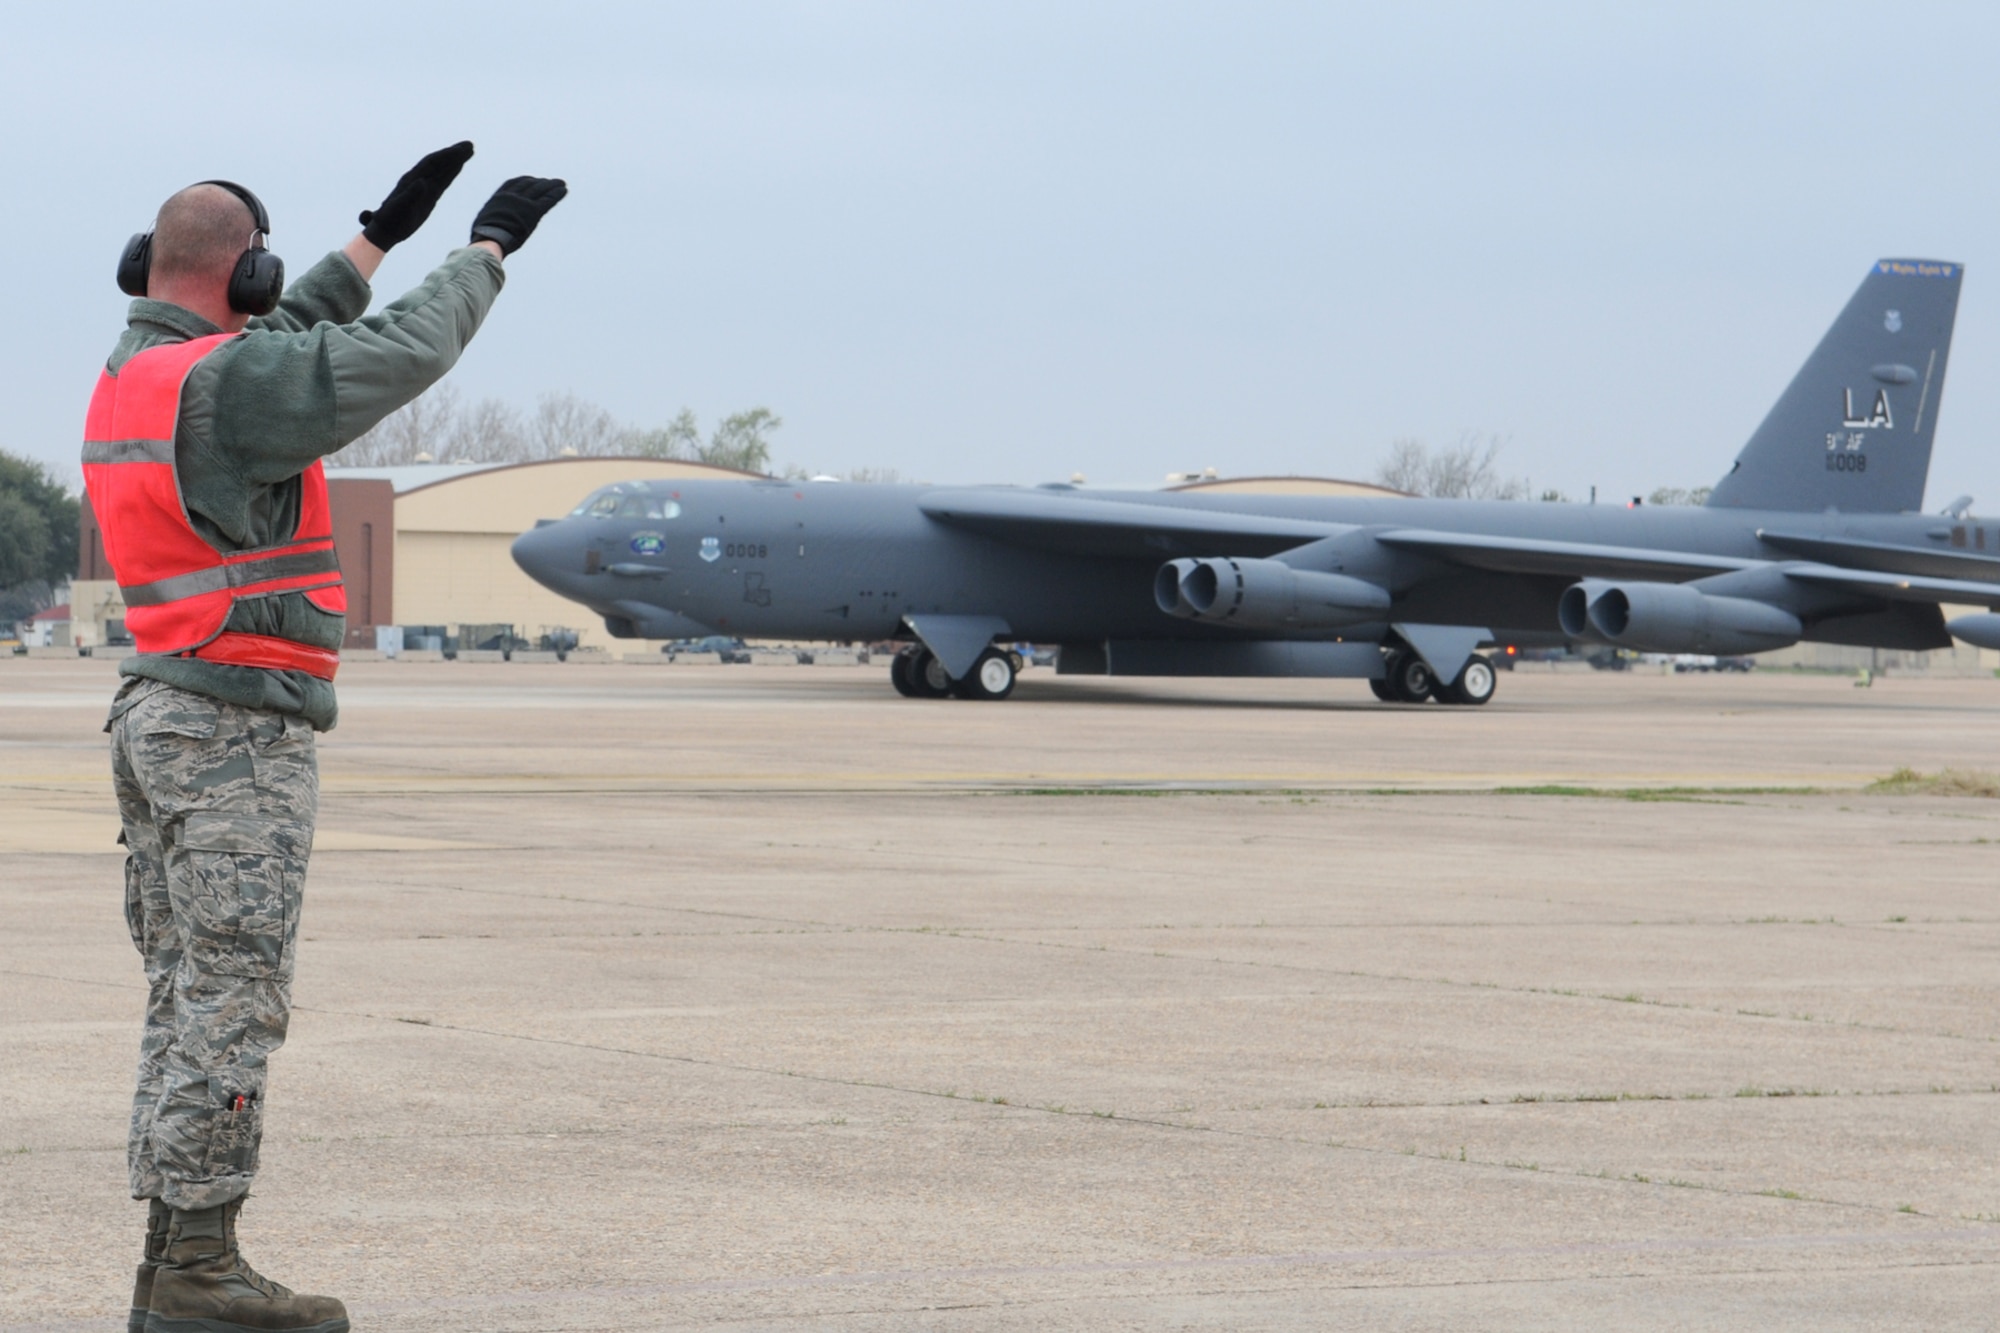 Senior Airman Jarod Feller, crew chief, 707th Maintenance Squadron, marshals a 2nd Bomb Wing B-52H, call sign Skull 61, back to its parking spot following its return from a nuclear training mission at Barksdale Air Force Base, La, March 5, 2011. The 707th MXS is an Air Force Reserve classic associate unit assigned to the 2nd Bomb Wing maintenance group and supports the 343rd Bomb Squadron. The launch of this crew and aircraft was significant for being the first supported by 2nd BW operations and maintenance personnel during a 307th Bomb Wing Reserve Unit Training Assembly. (U. S. Air Force Photo/Master Sgt. Greg Steele)

